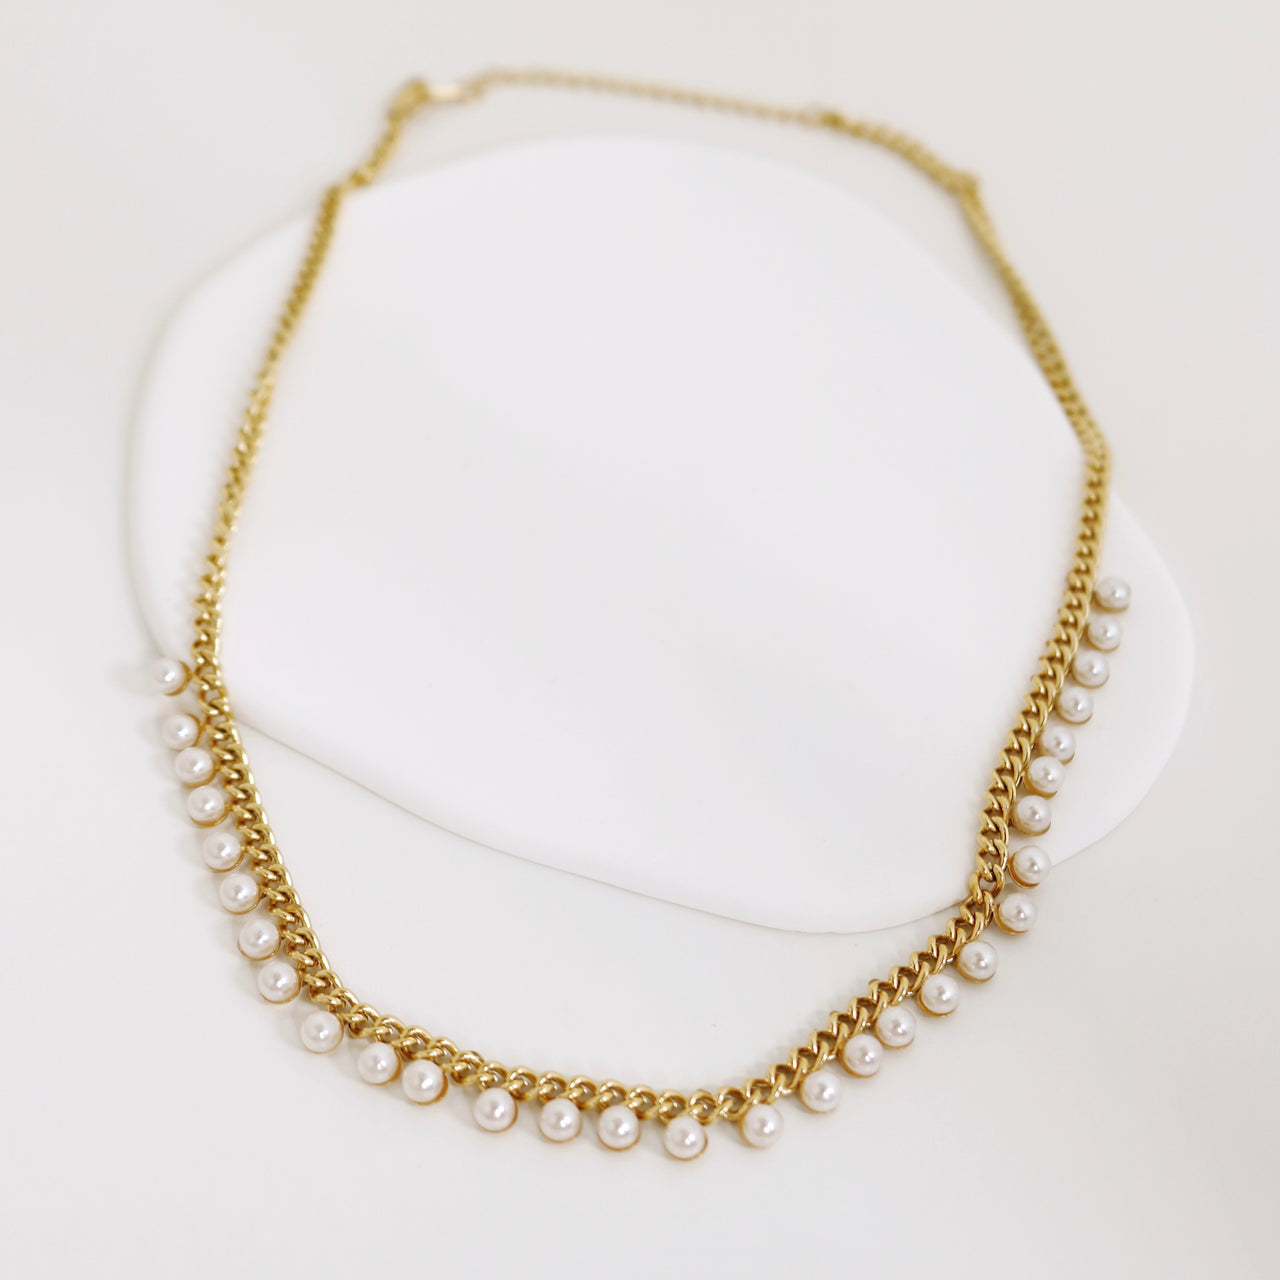 Gold Amber necklace